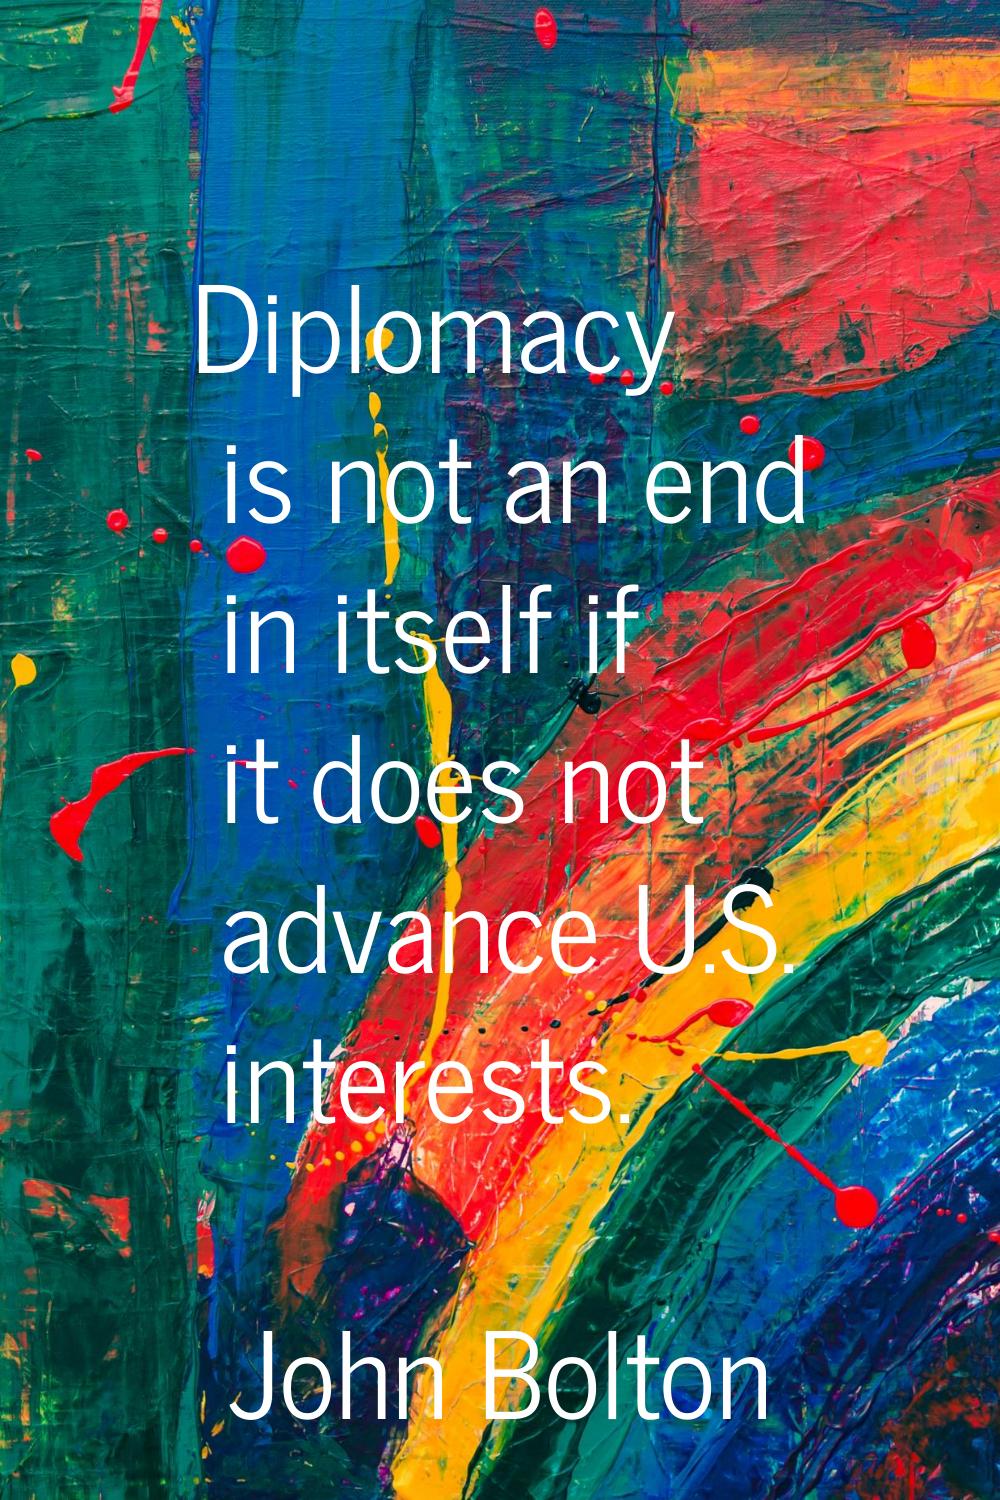 Diplomacy is not an end in itself if it does not advance U.S. interests.